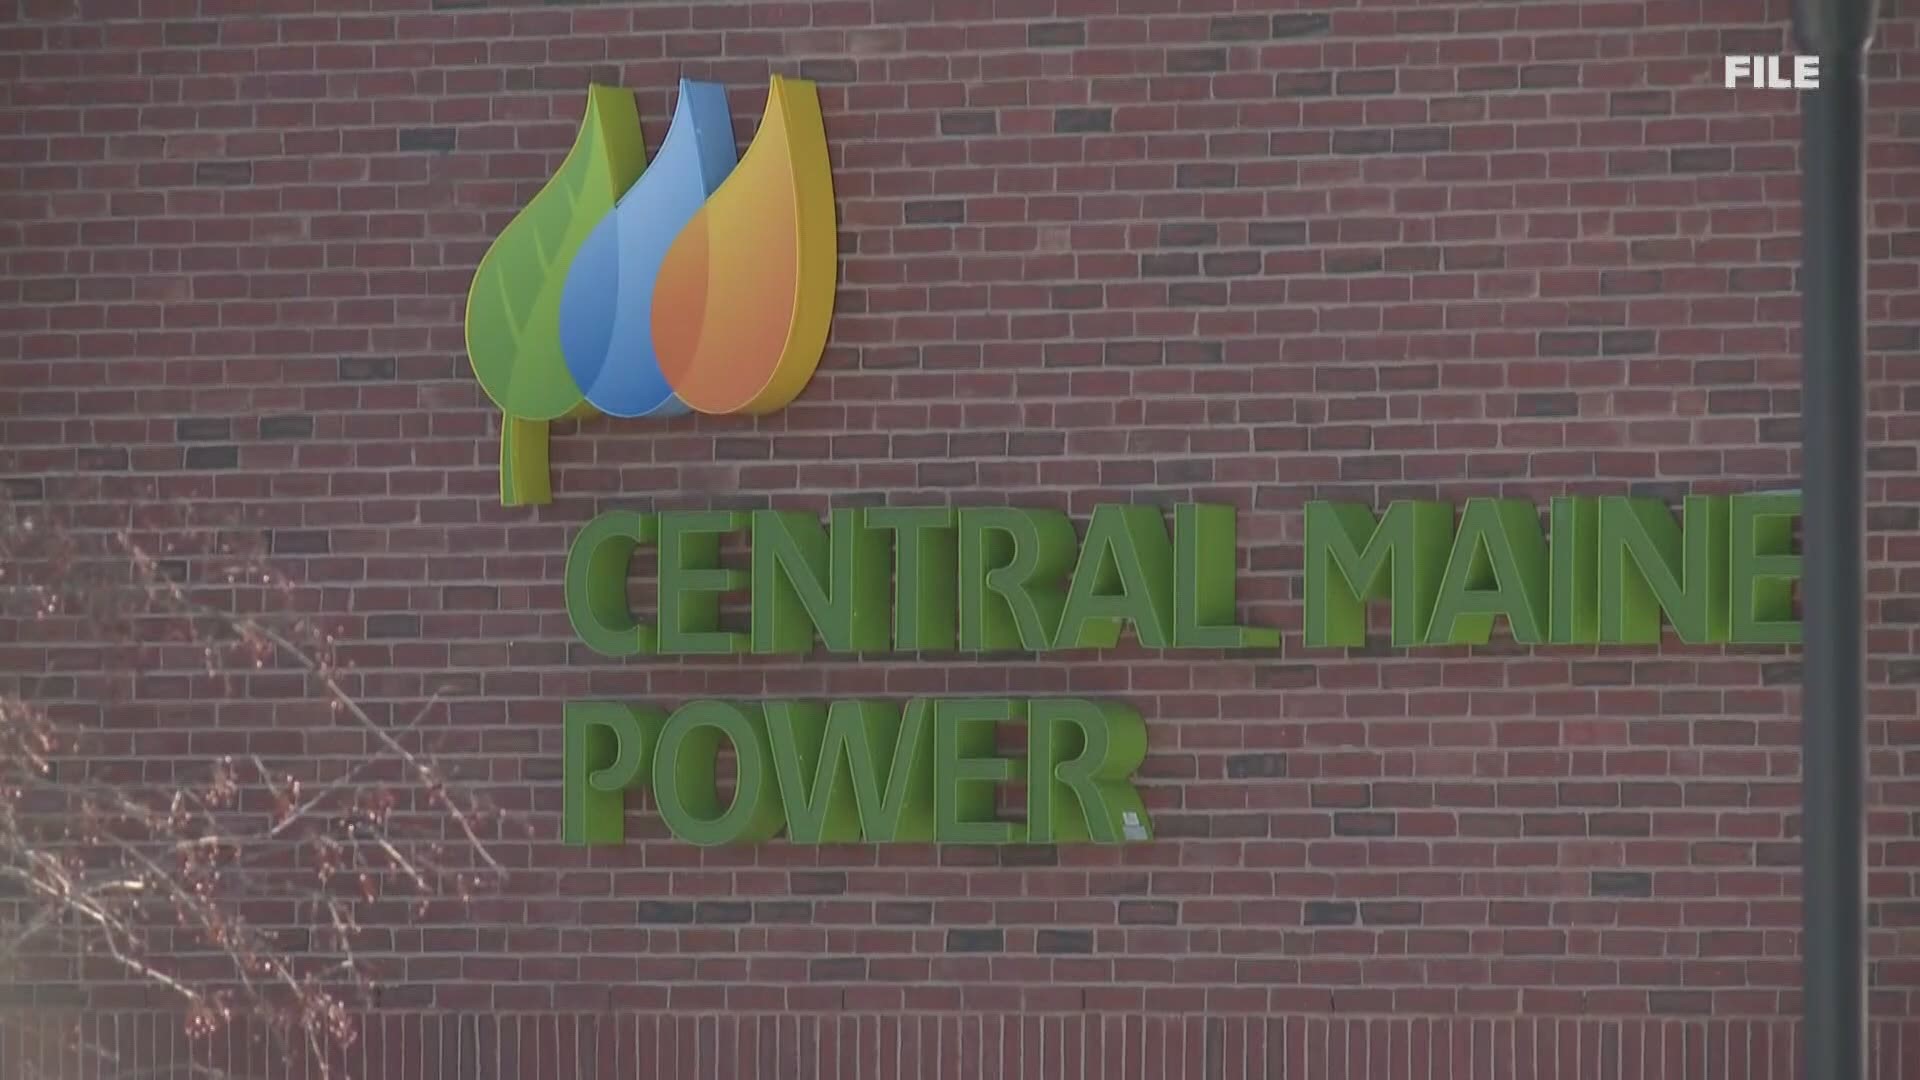 While critics say the report highlights structural issues, leaders within the company feel that the audit emphasizes some of the positive progress that CMP has made.